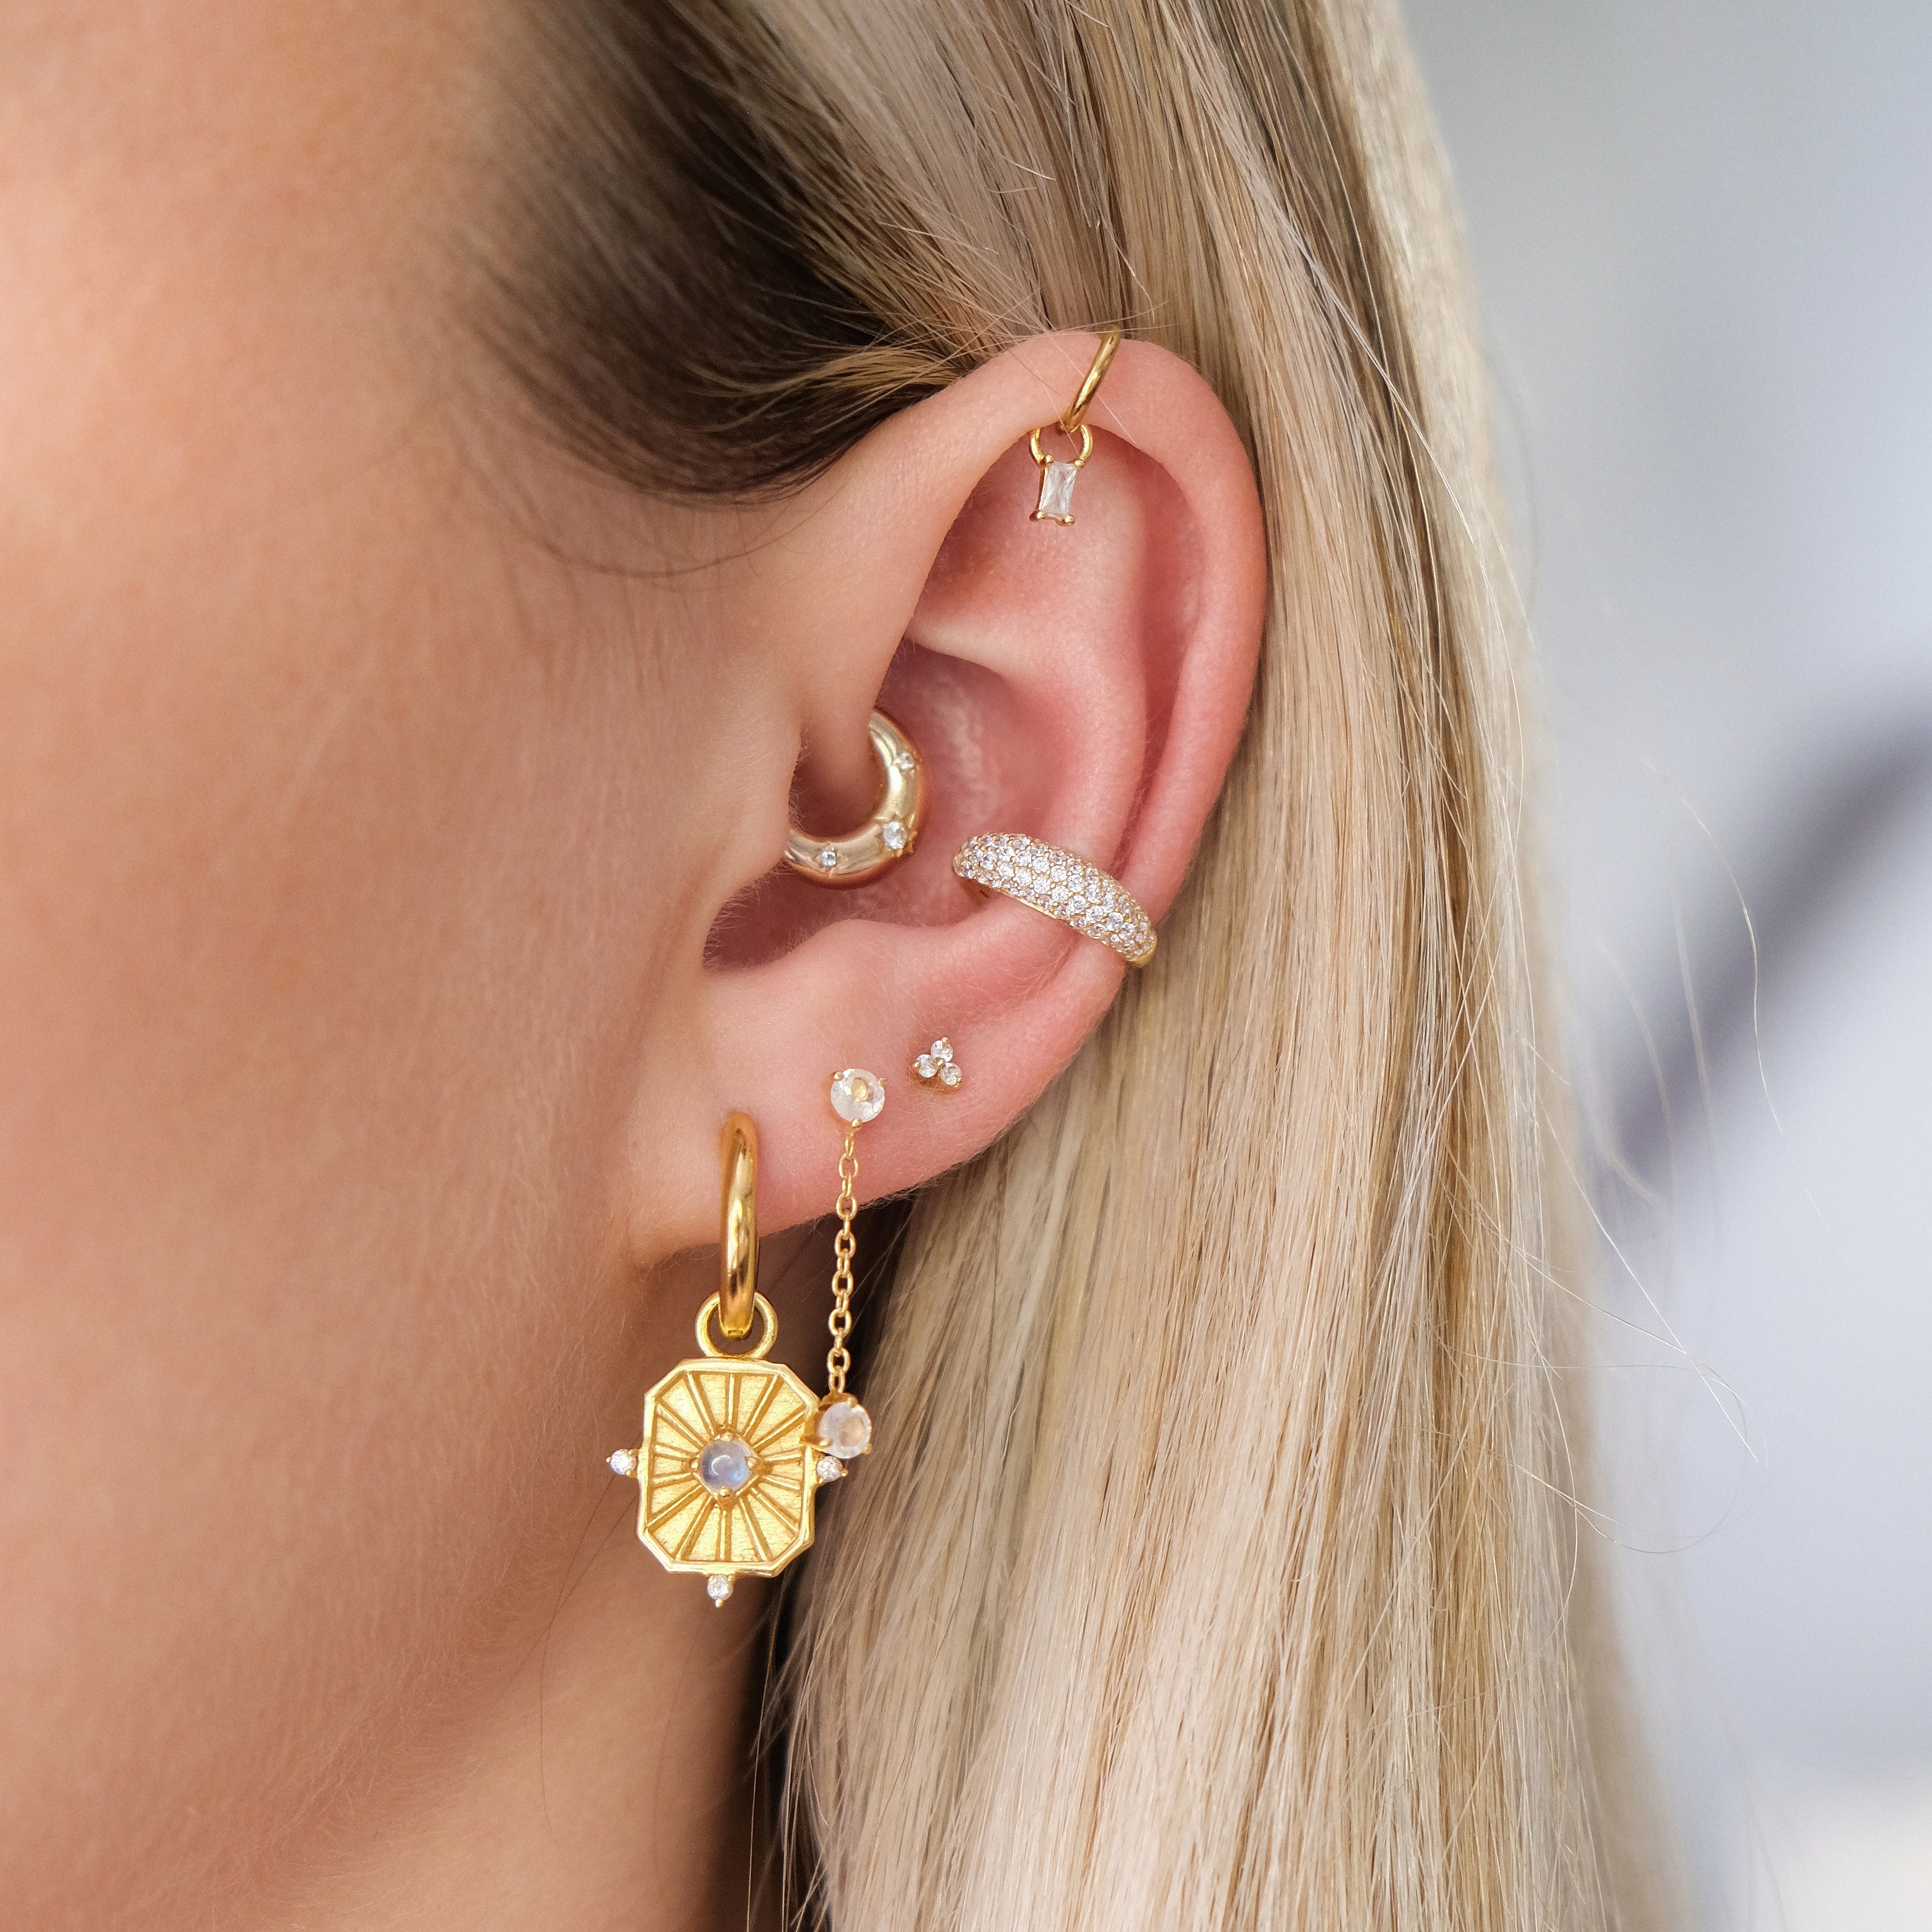 14K Solid Gold Pavé Conch Piercing Hoop